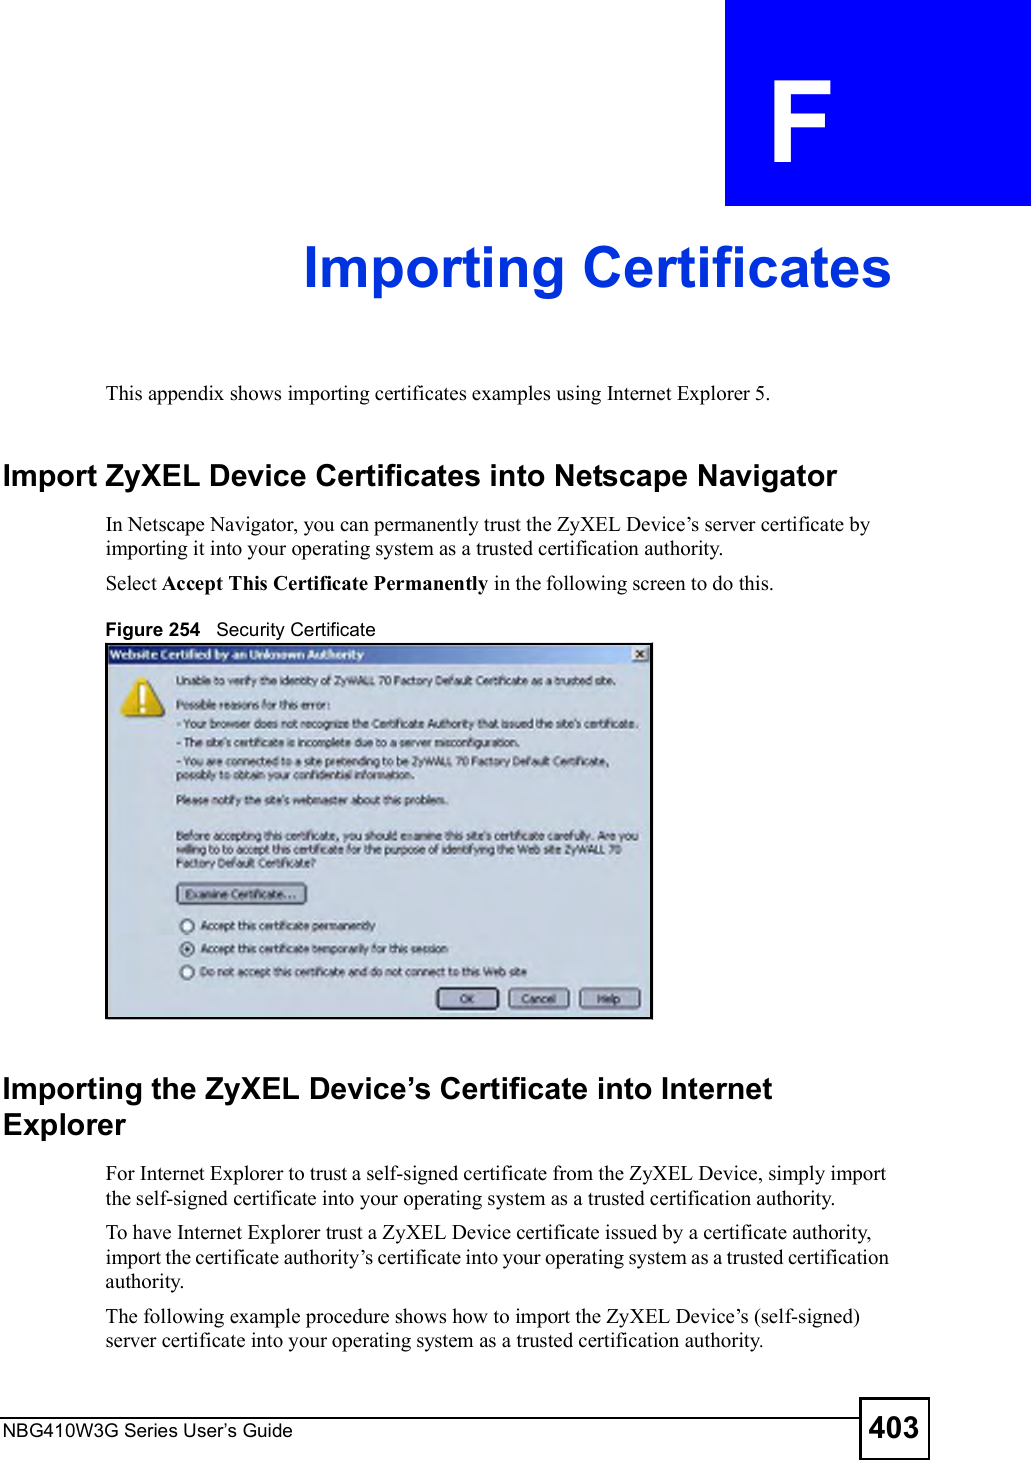 NBG410W3G Series User s Guide 403APPENDIX  F Importing CertificatesThis appendix shows importing certificates examples using Internet Explorer 5.Import ZyXEL Device Certificates into Netscape NavigatorIn Netscape Navigator, you can permanently trust the ZyXEL Device!s server certificate by importing it into your operating system as a trusted certification authority. Select Accept This Certificate Permanently in the following screen to do this. Figure 254   Security CertificateImporting the ZyXEL Device s Certificate into Internet ExplorerFor Internet Explorer to trust a self-signed certificate from the ZyXEL Device, simply import the self-signed certificate into your operating system as a trusted certification authority. To have Internet Explorer trust a ZyXEL Device certificate issued by a certificate authority, import the certificate authority!s certificate into your operating system as a trusted certification authority.The following example procedure shows how to import the ZyXEL Device!s (self-signed) server certificate into your operating system as a trusted certification authority.